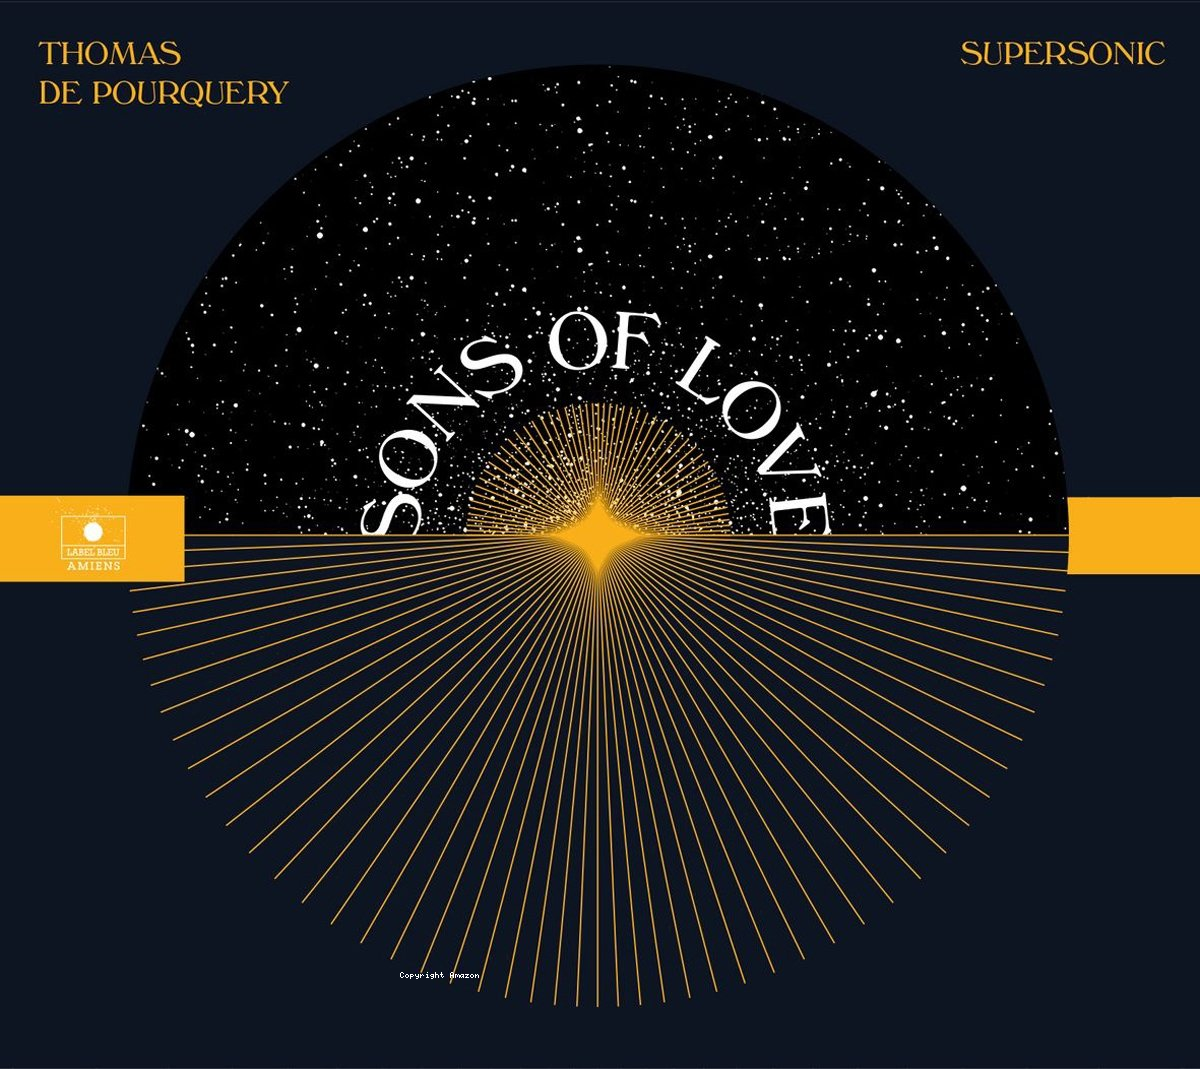 Sons of love